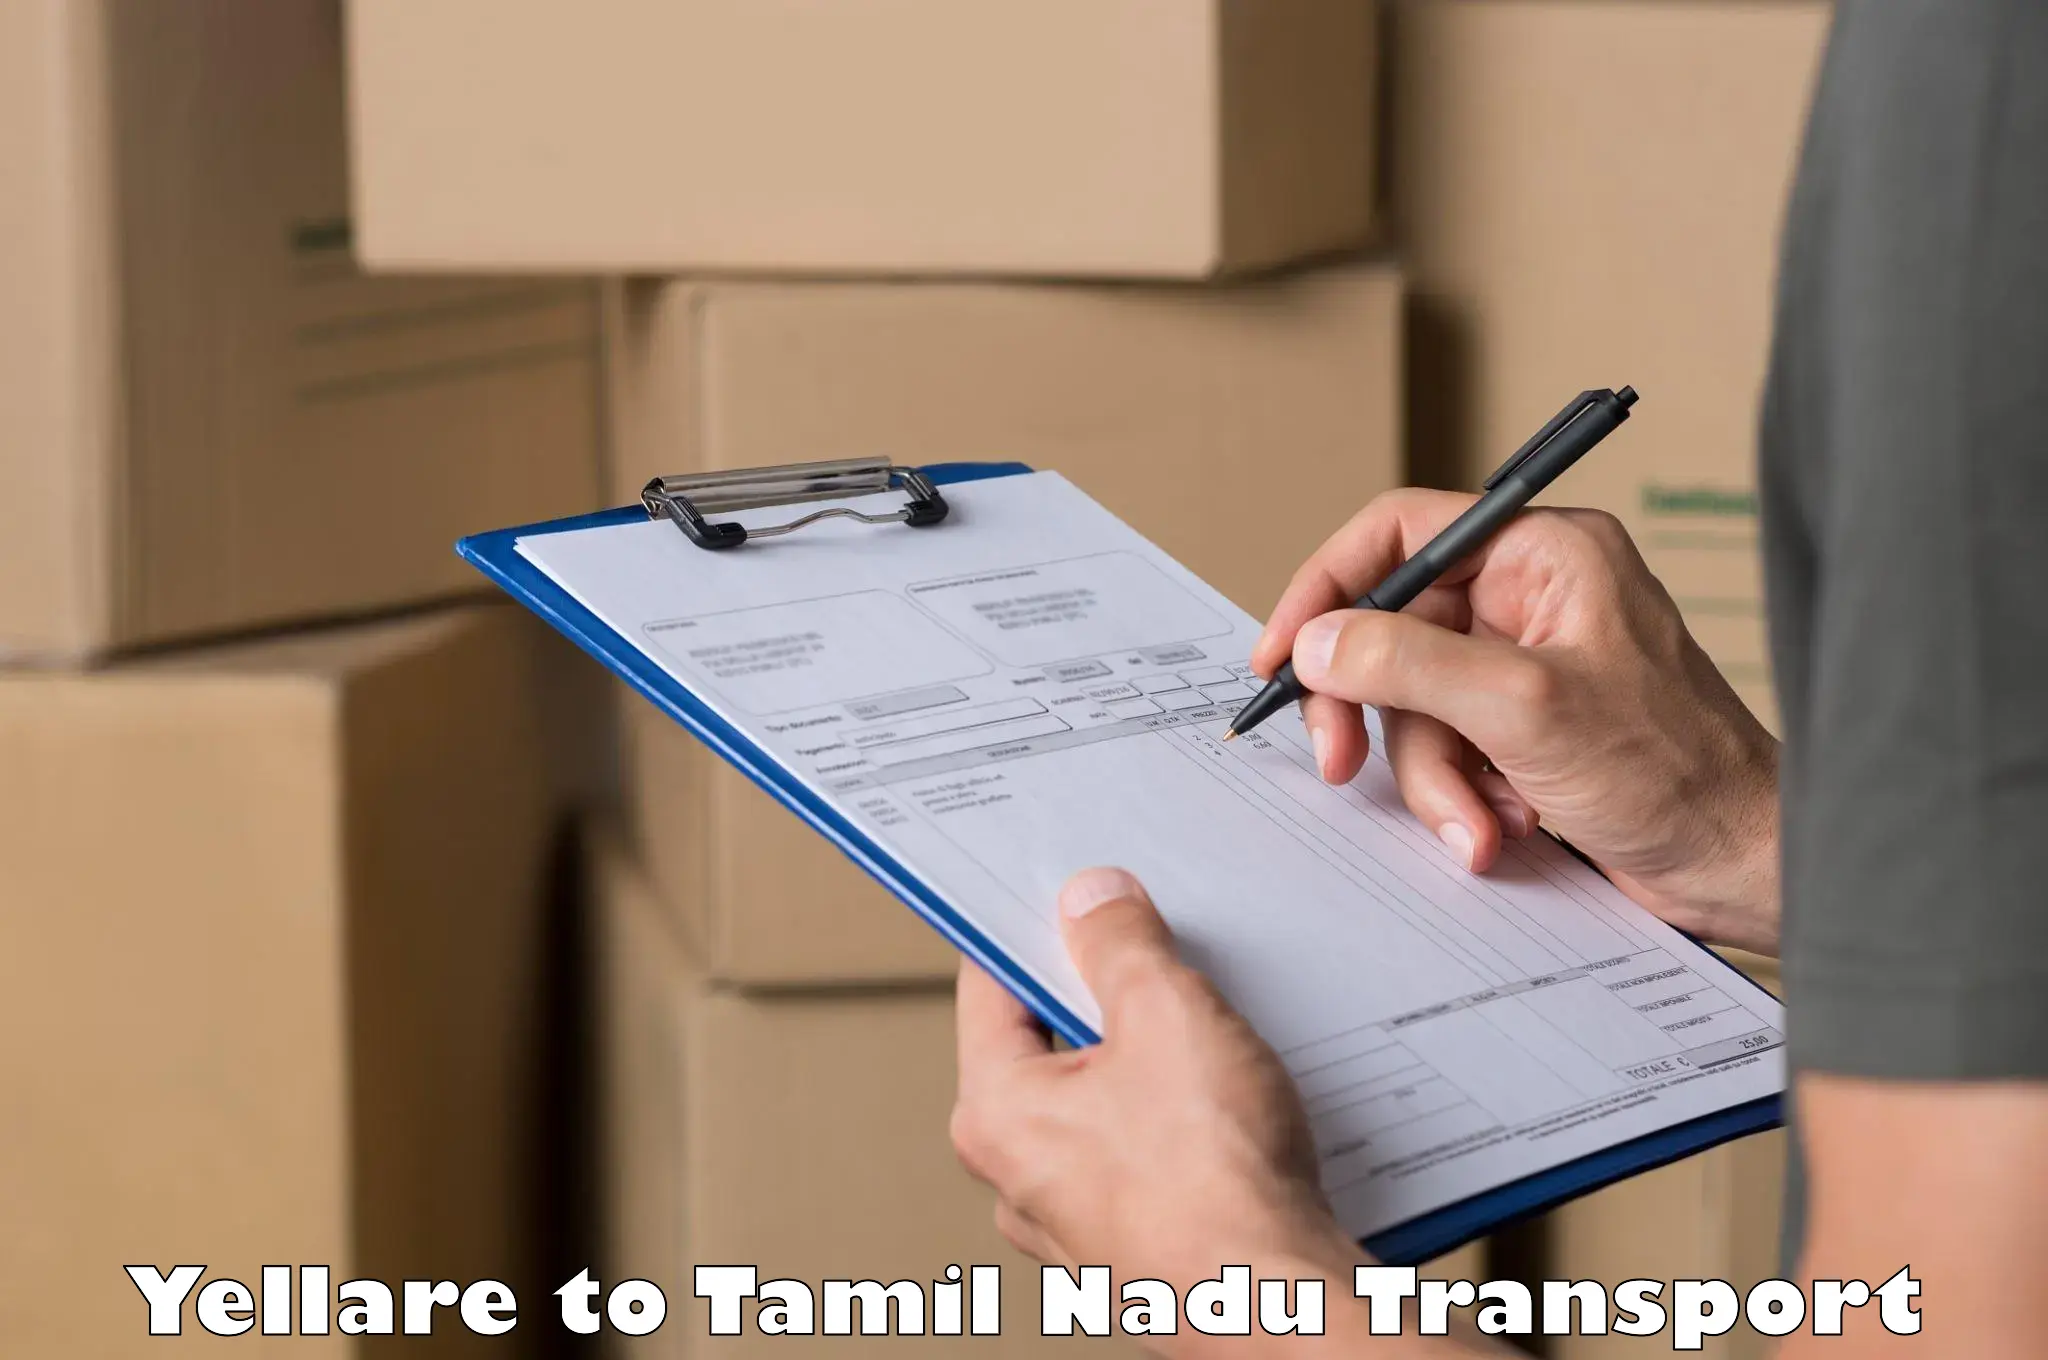 Truck transport companies in India Yellare to Annur